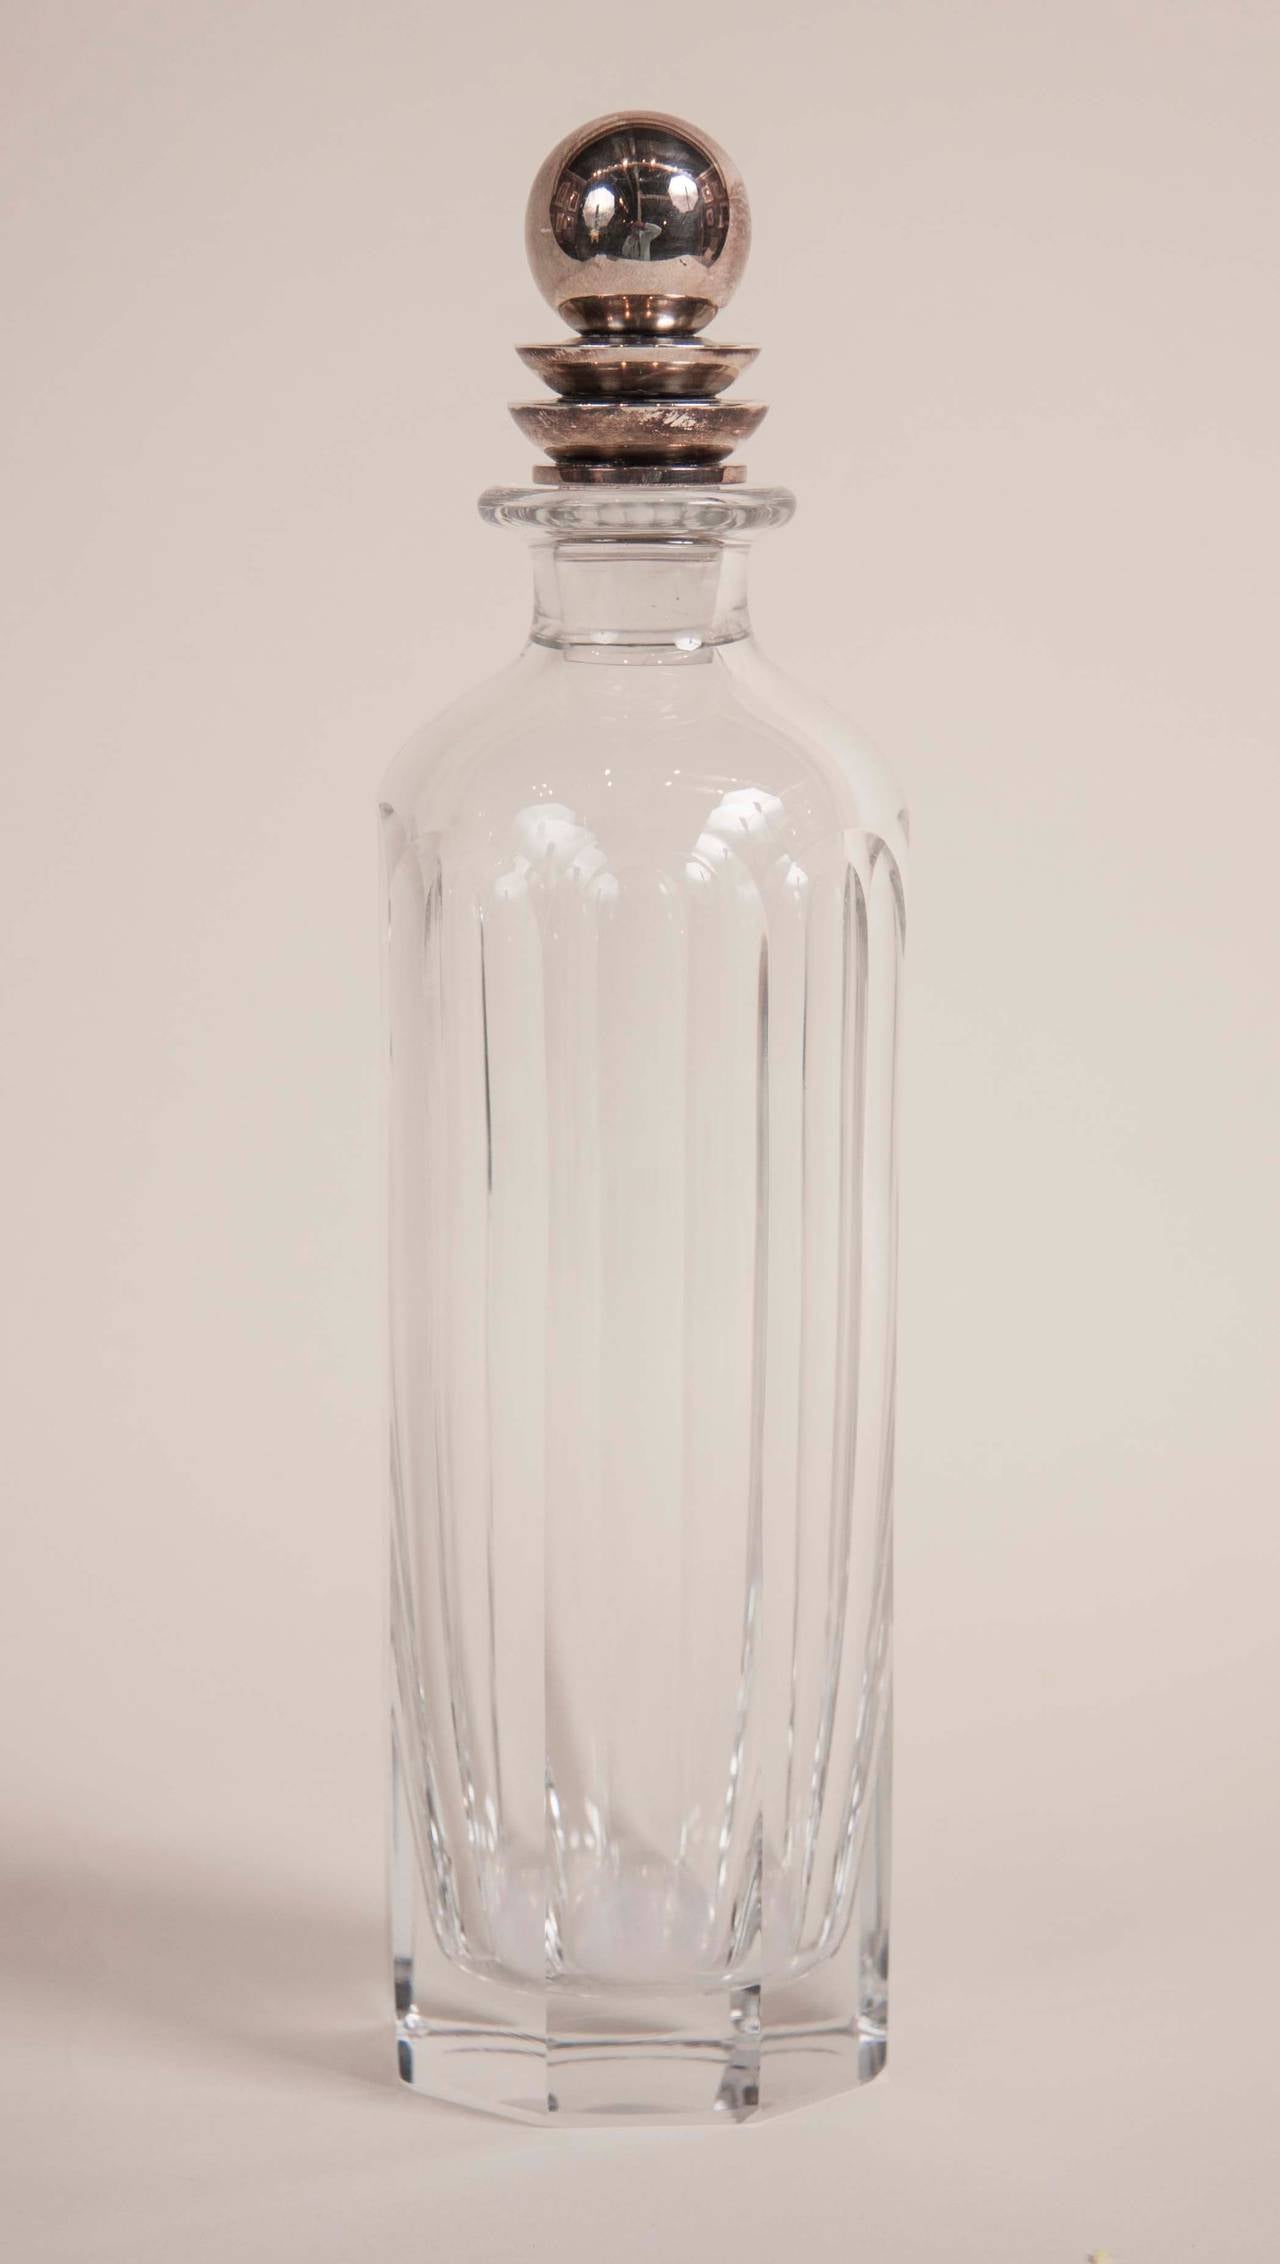 An Art Deco style crystal pyramid decanter with a silver top designed by Harald Nielsen in the first half of the twentieth century.